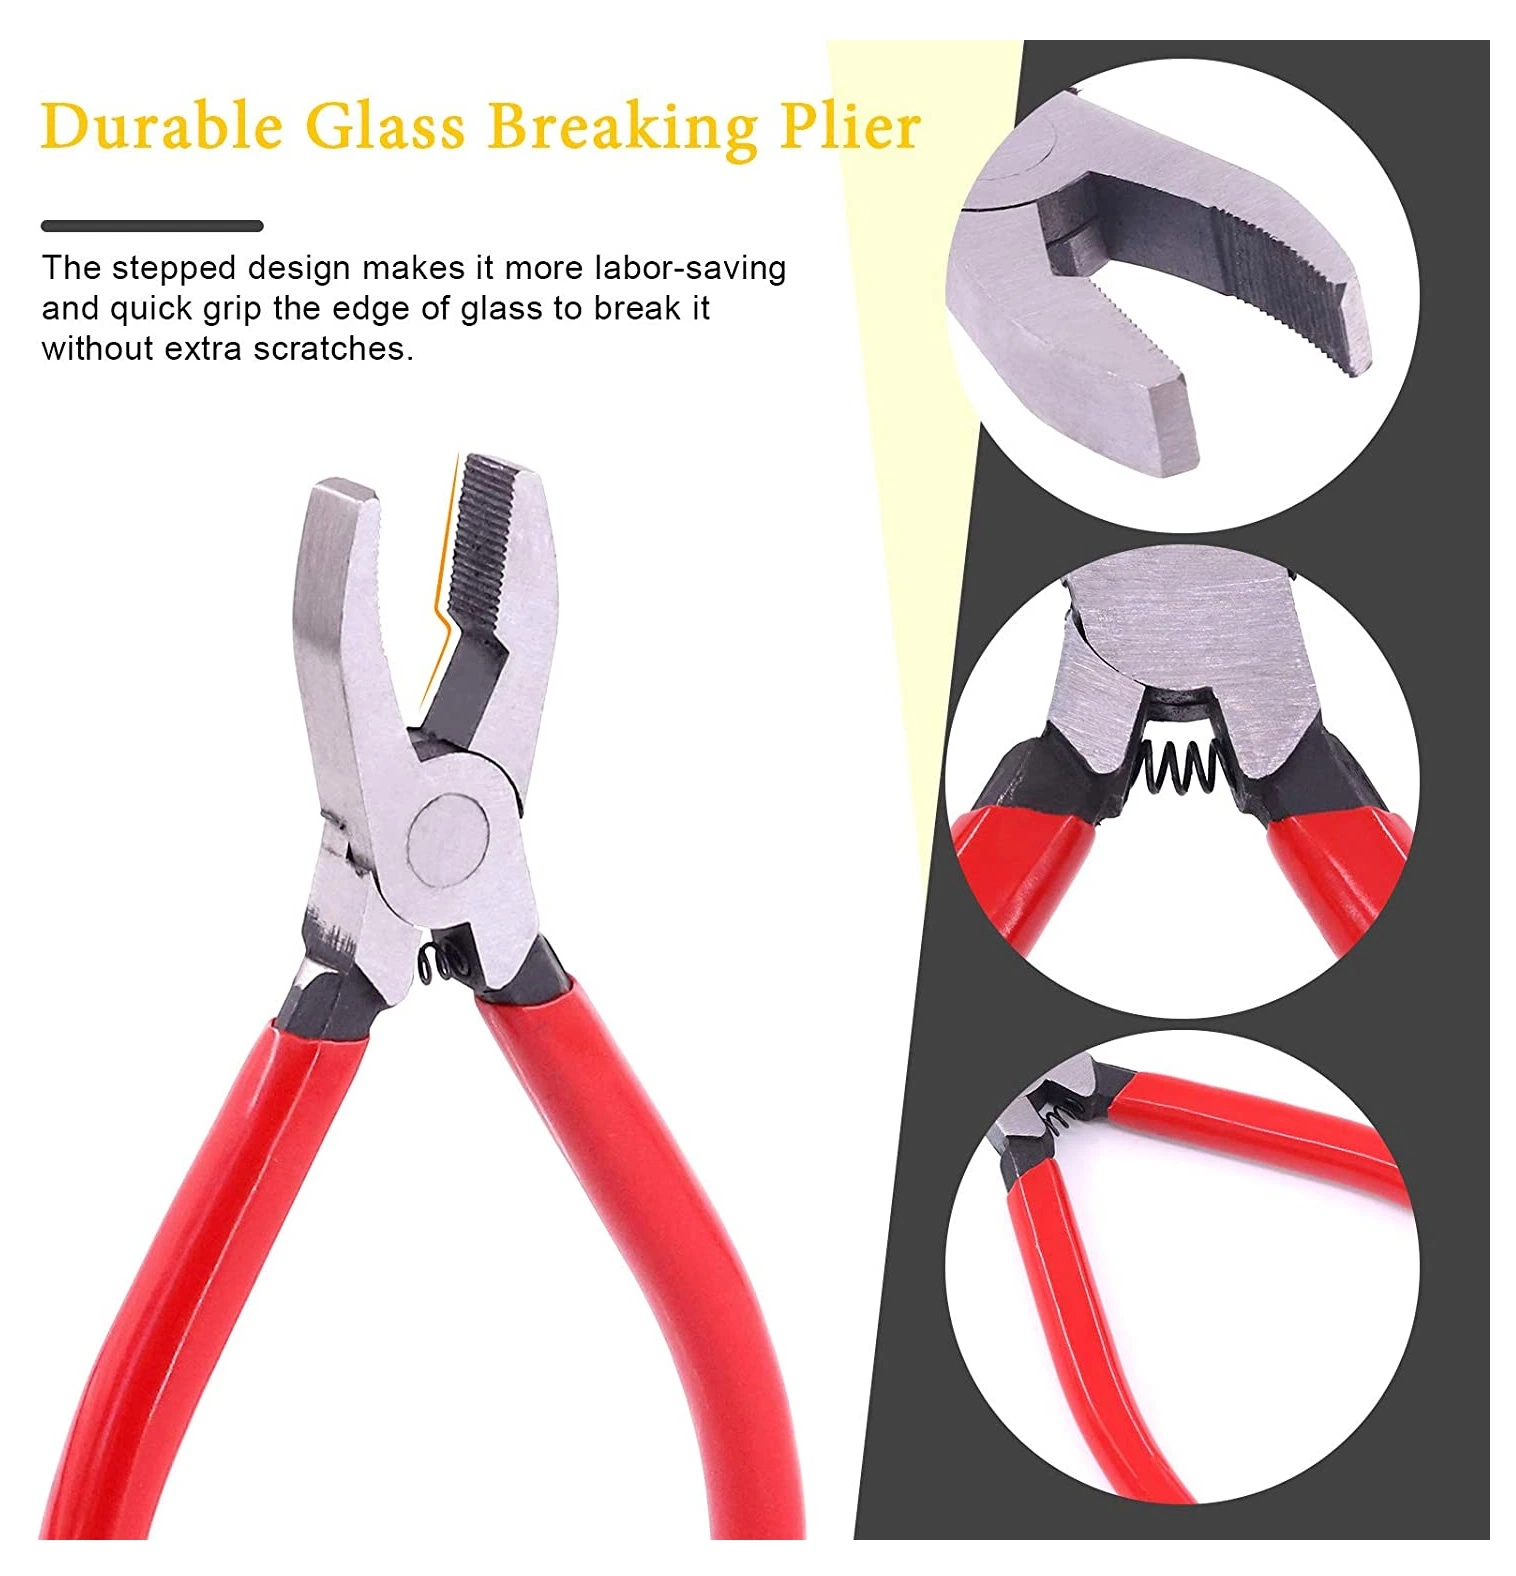 Profeesional Hand Tools 3PCS Glass Running Breaking Pliers Set for Stained Glass Cutting